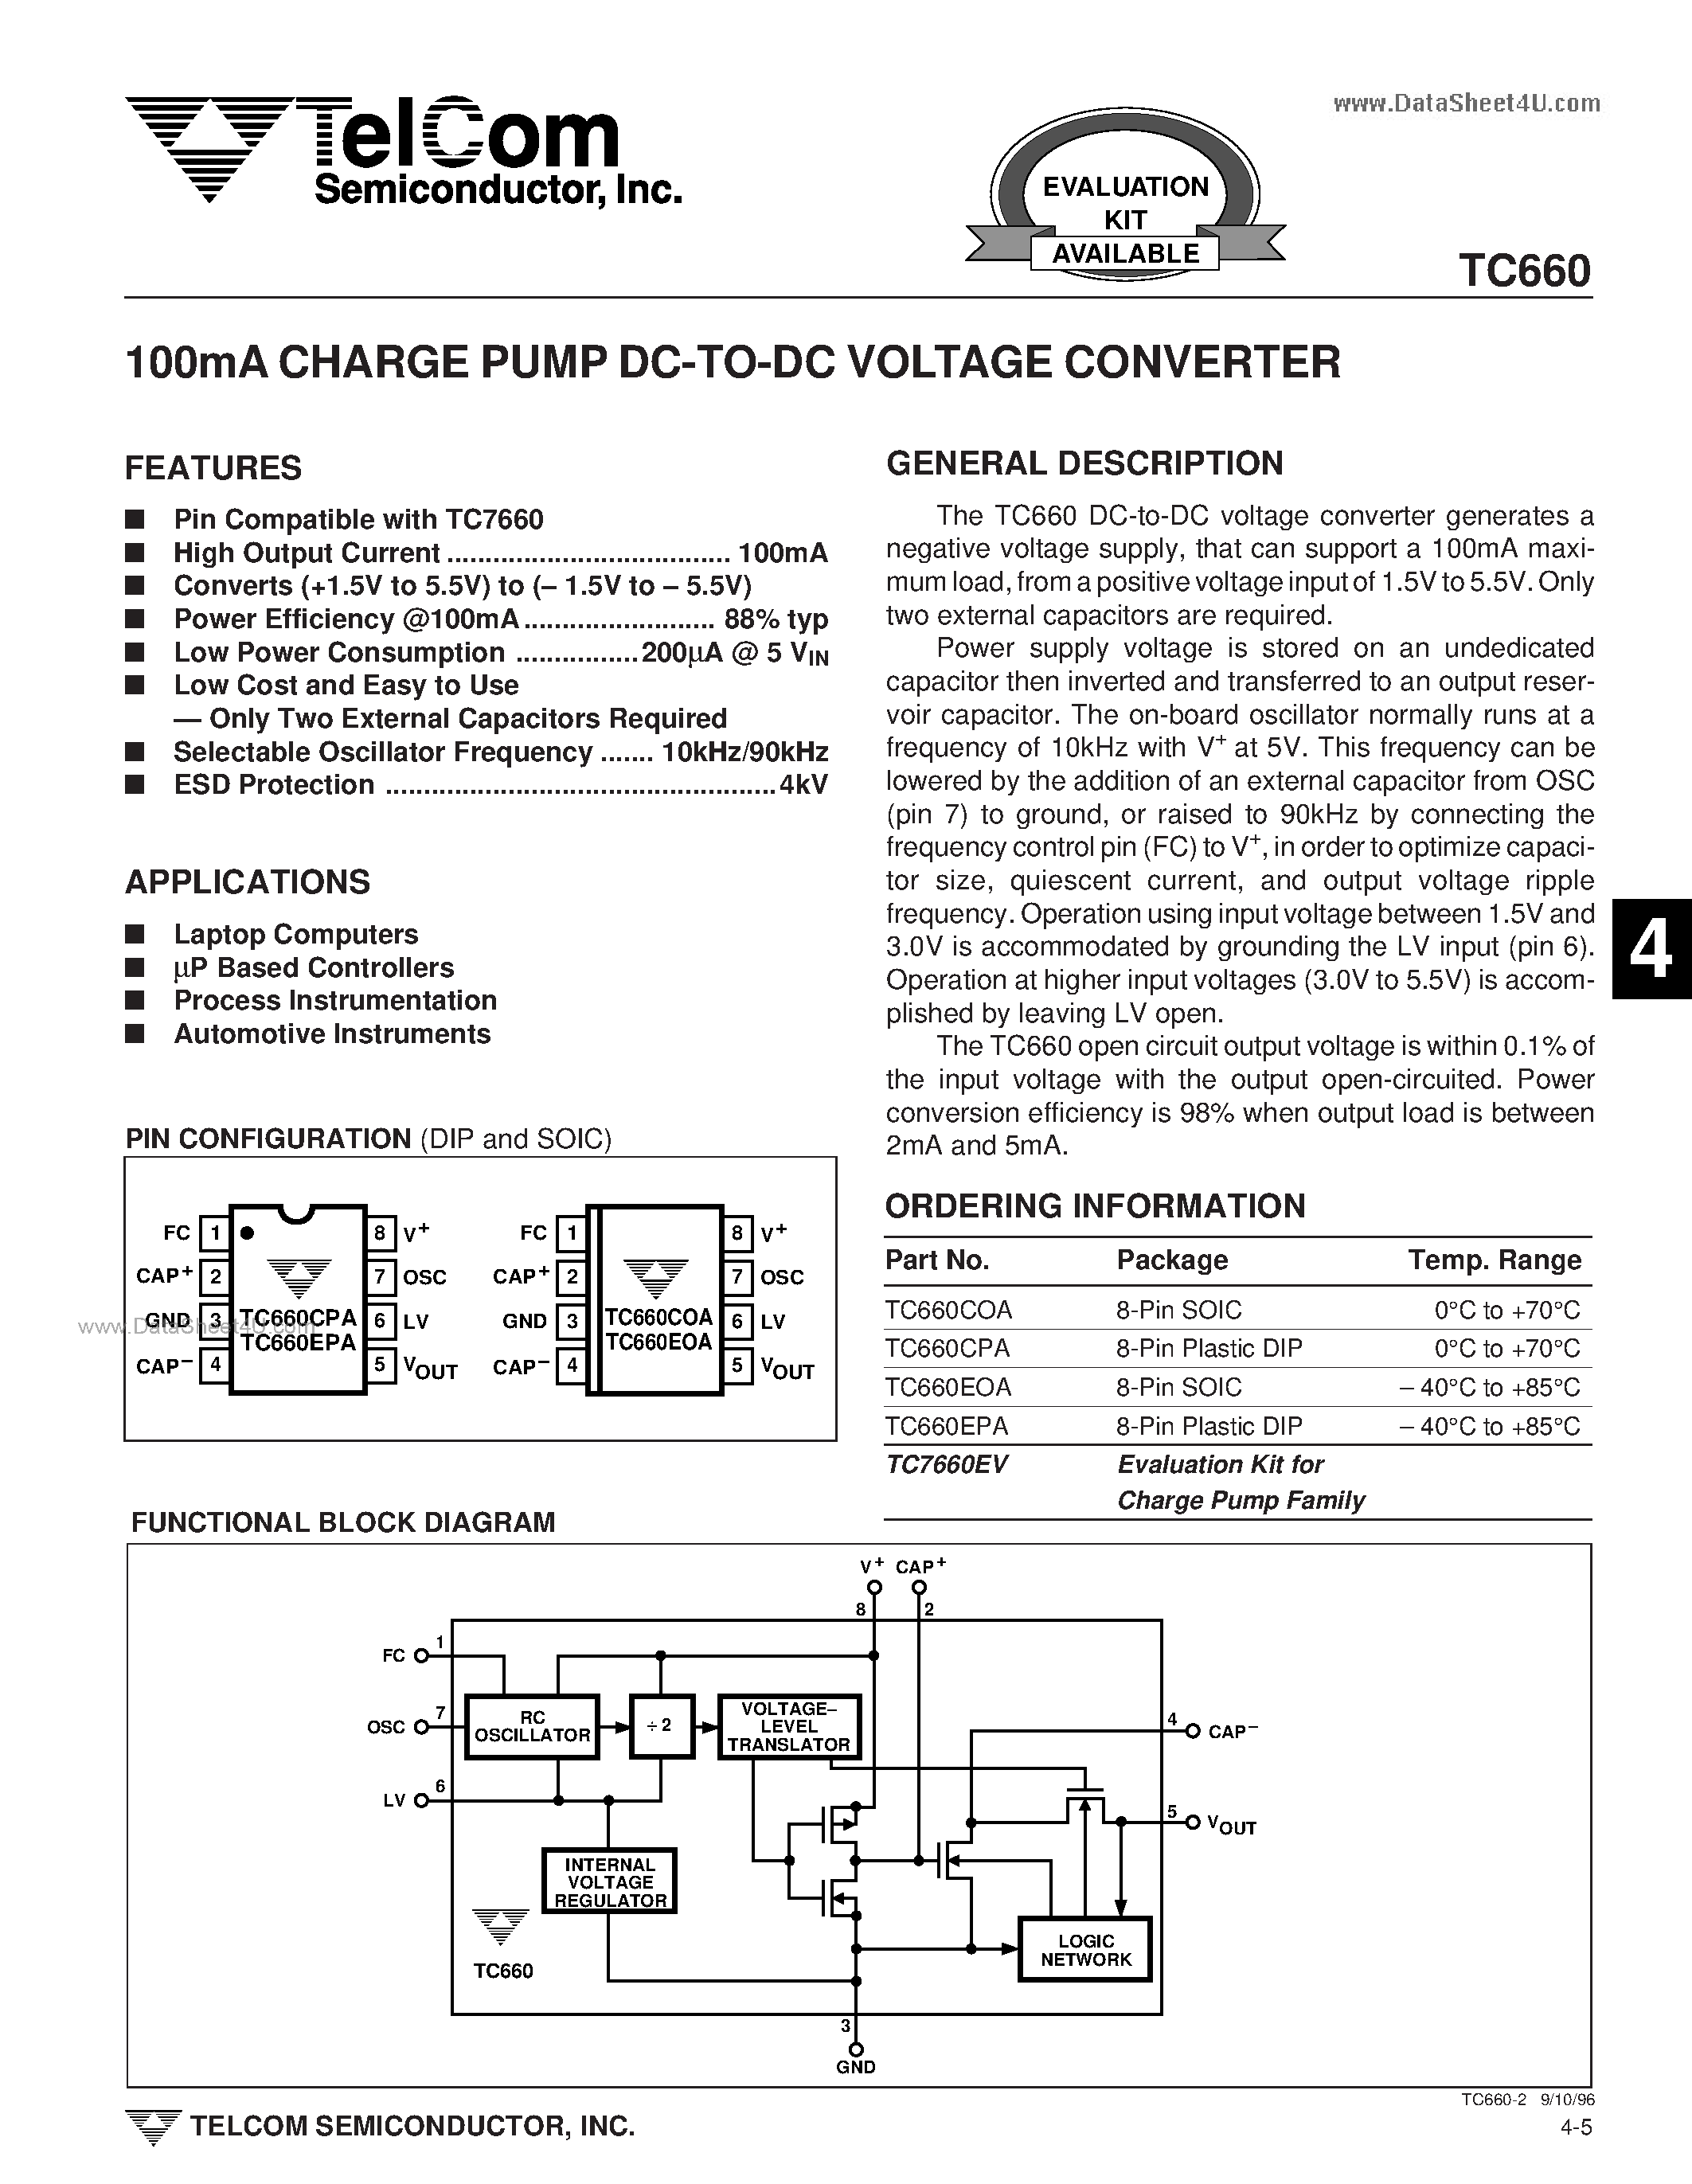 Datasheet TC660 - 100mA CHARGE PUMP DC-TO-DC VOLTAGE CONVERTER page 1